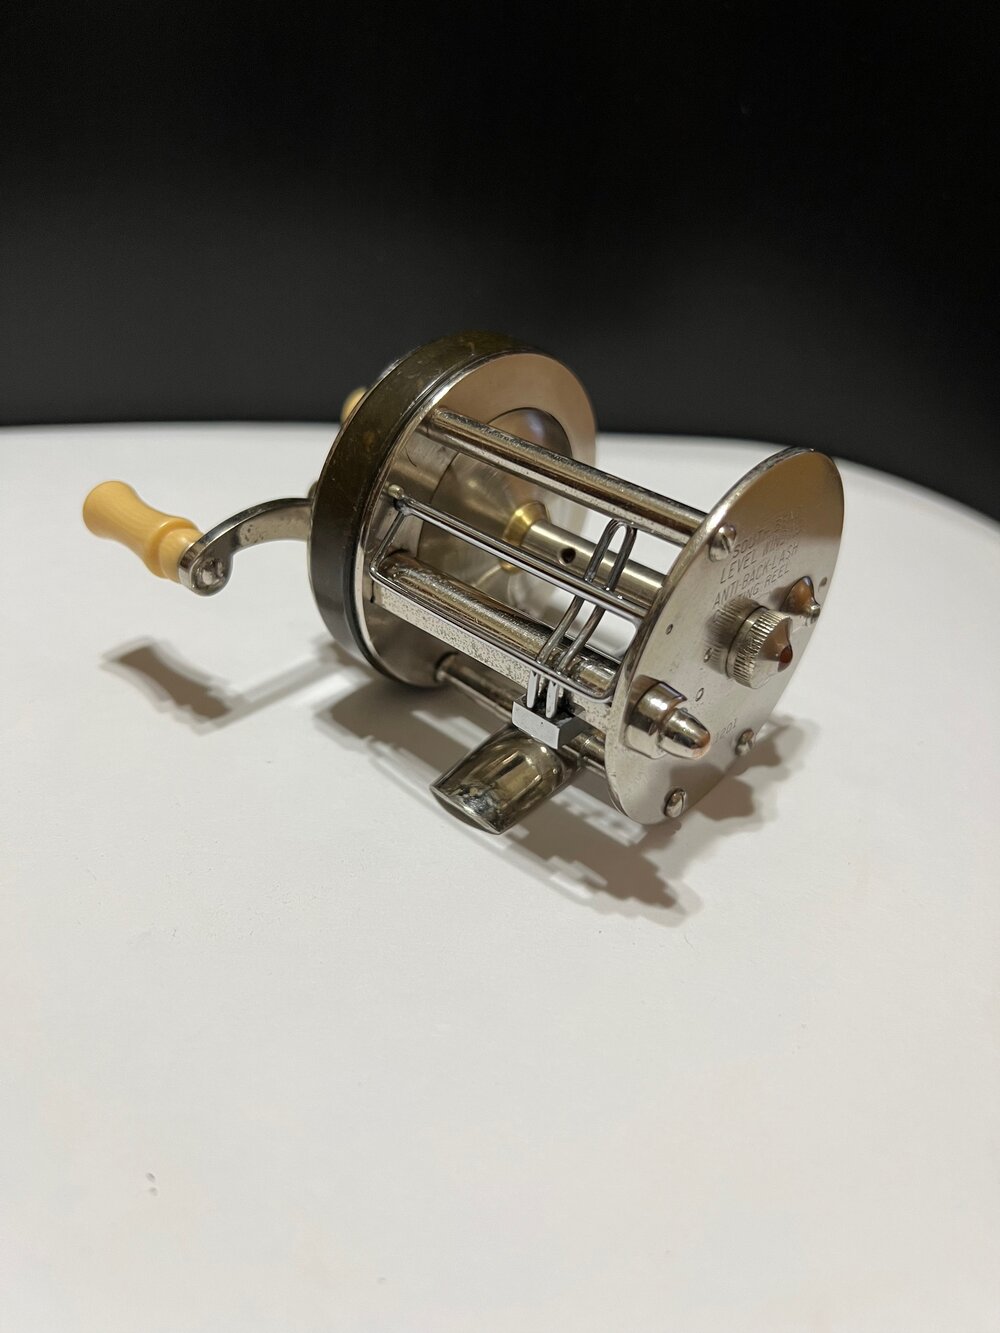 South Bend No. 1201 Level Winding Anti-Backlash Casting Reel